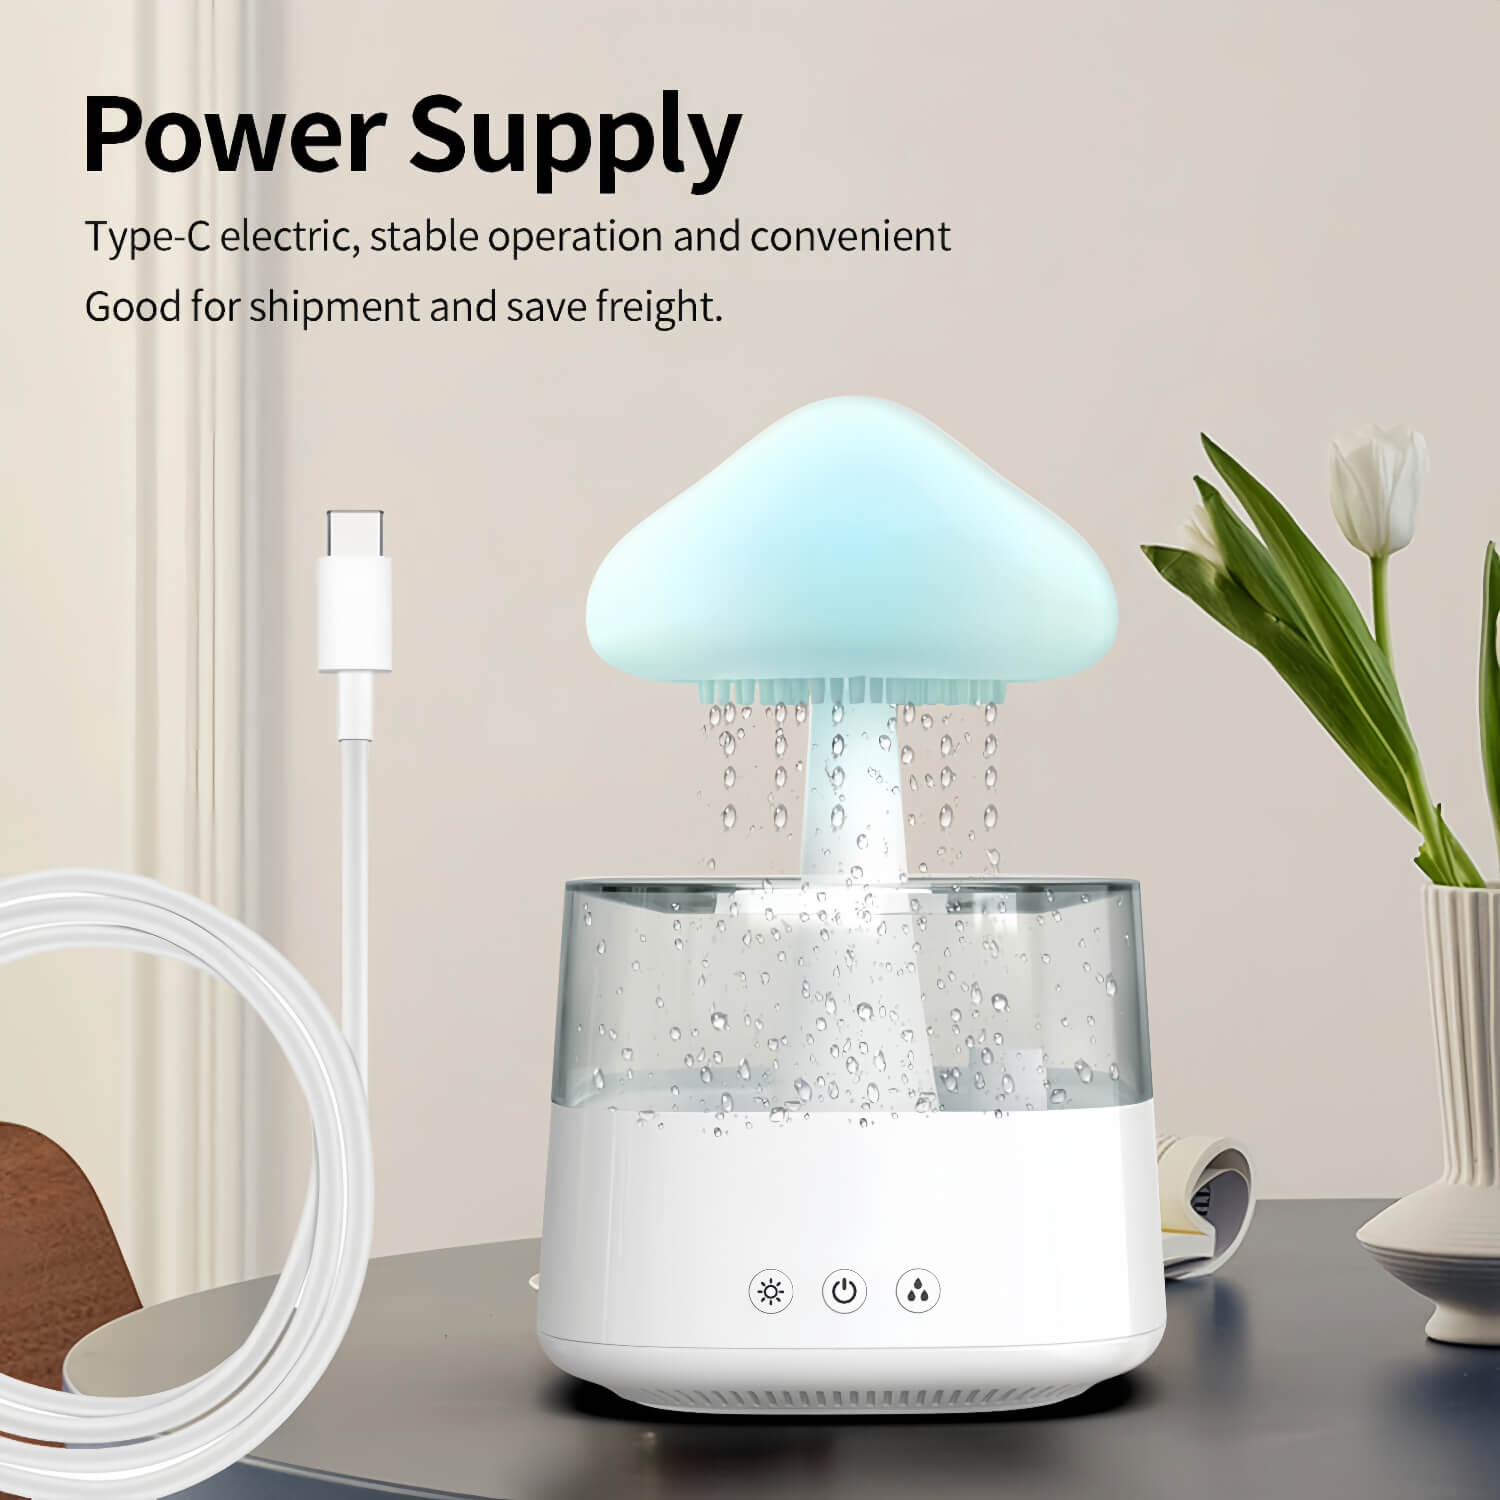 Transform your space with the Rain Cloud Diffuser, as it emulates a soothing rain shower.